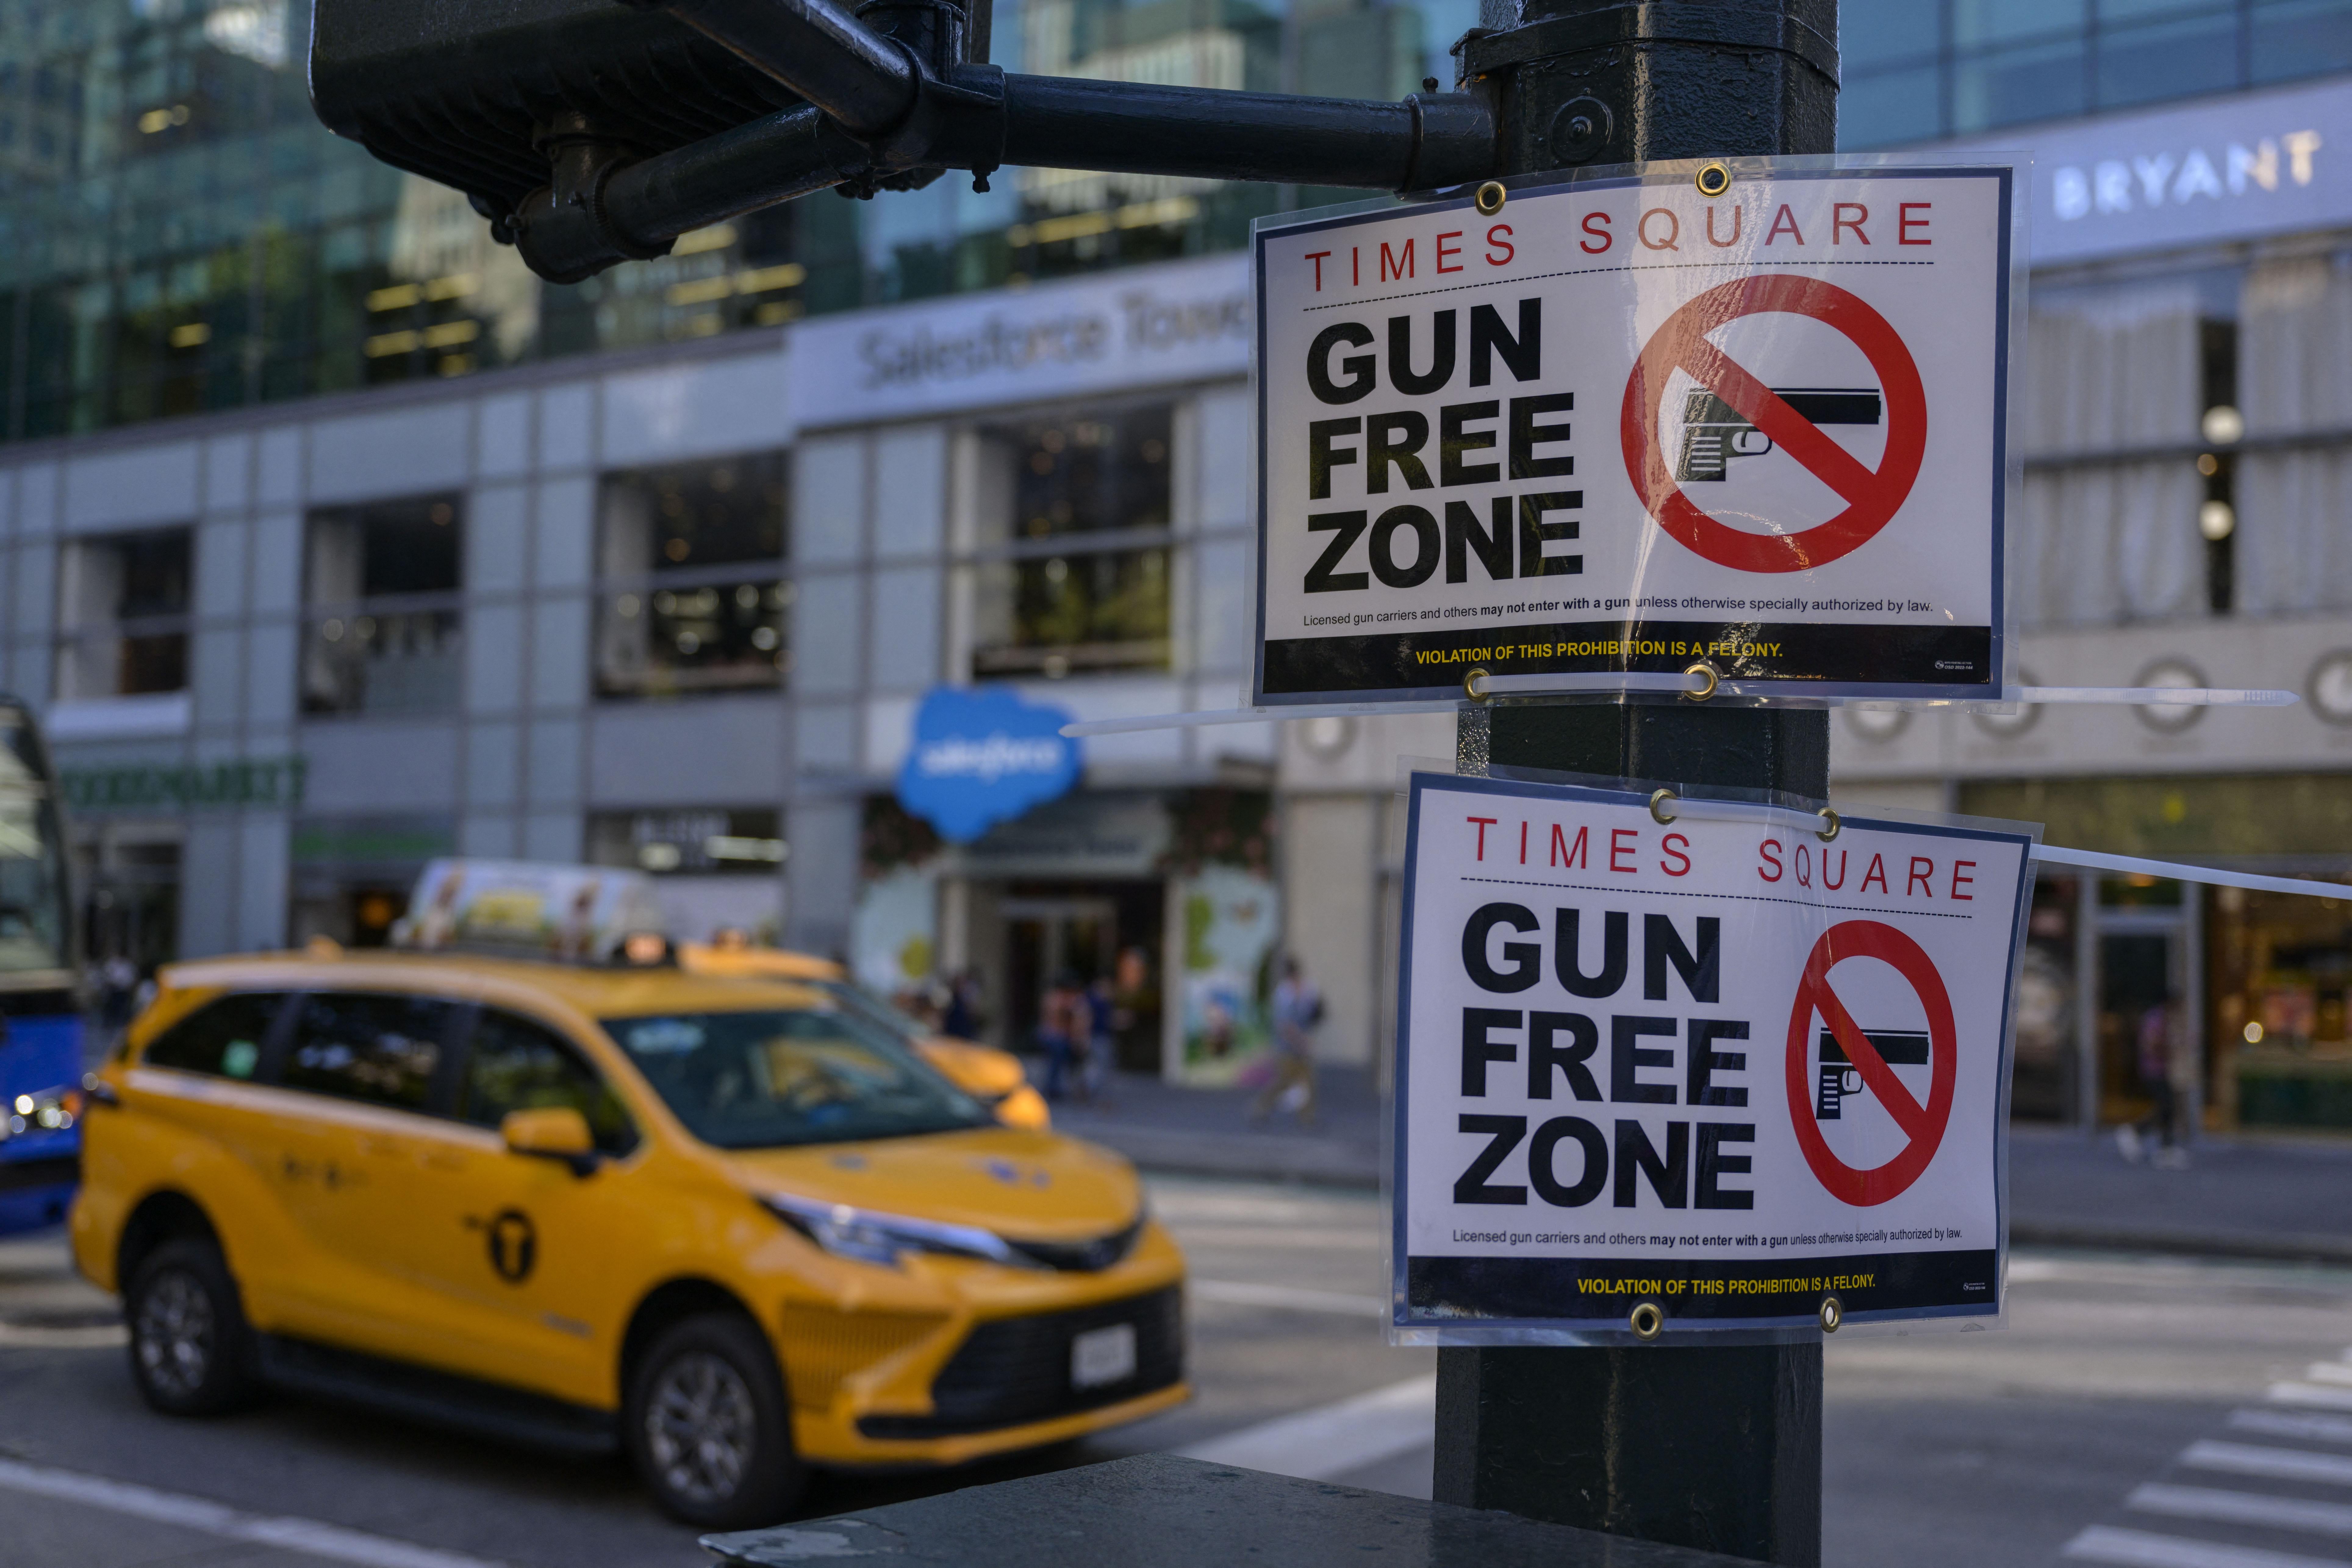 Gun Free Zone signs with cabs in the background.